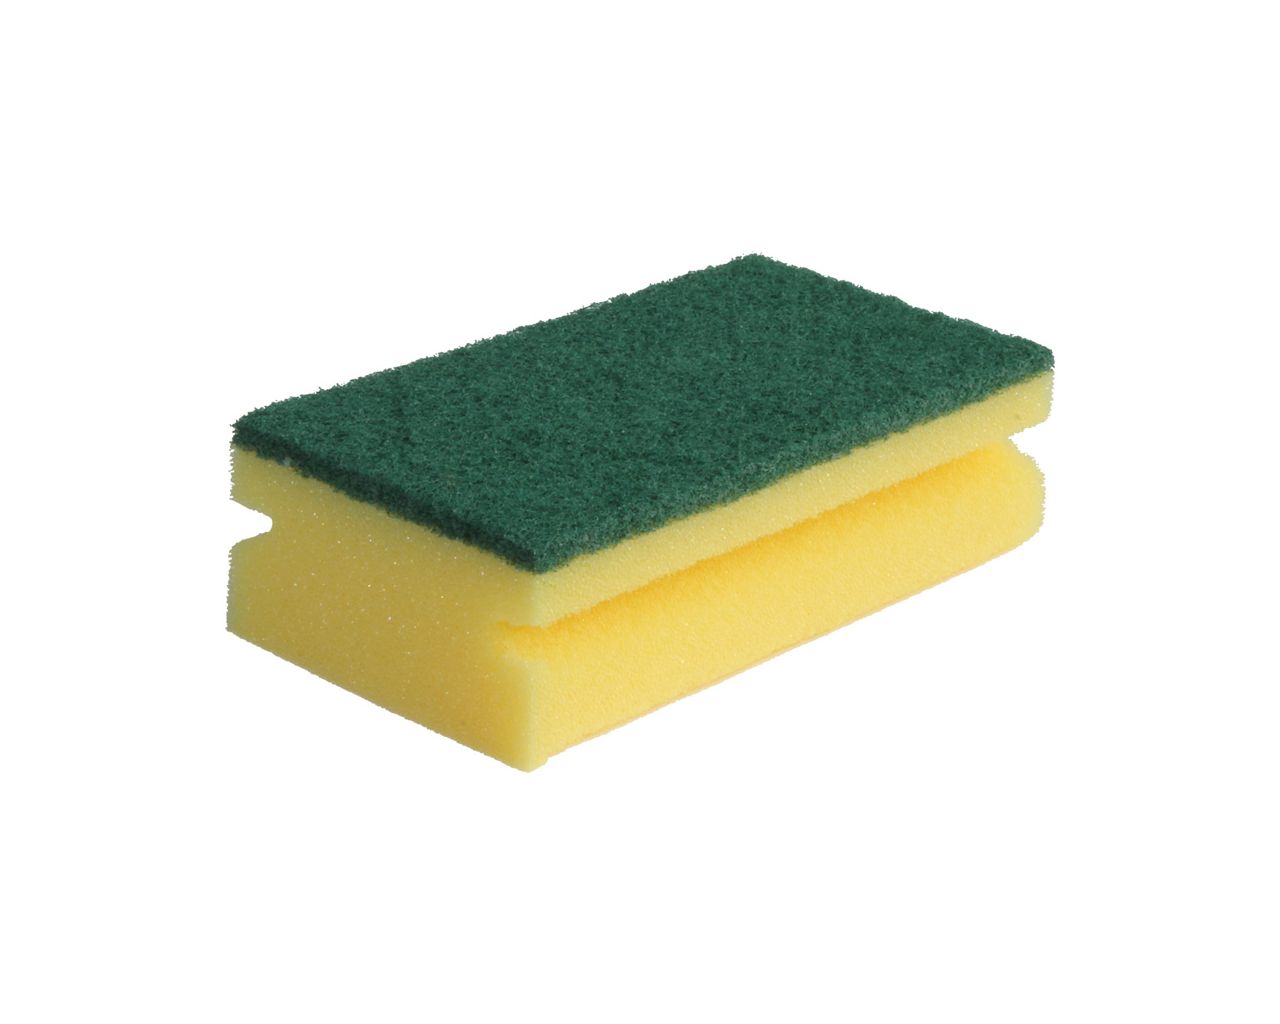 Easy grip foam backed scourer for multipurpose use, large size, 3 pcs. / package  (yellow with green scouring surface)